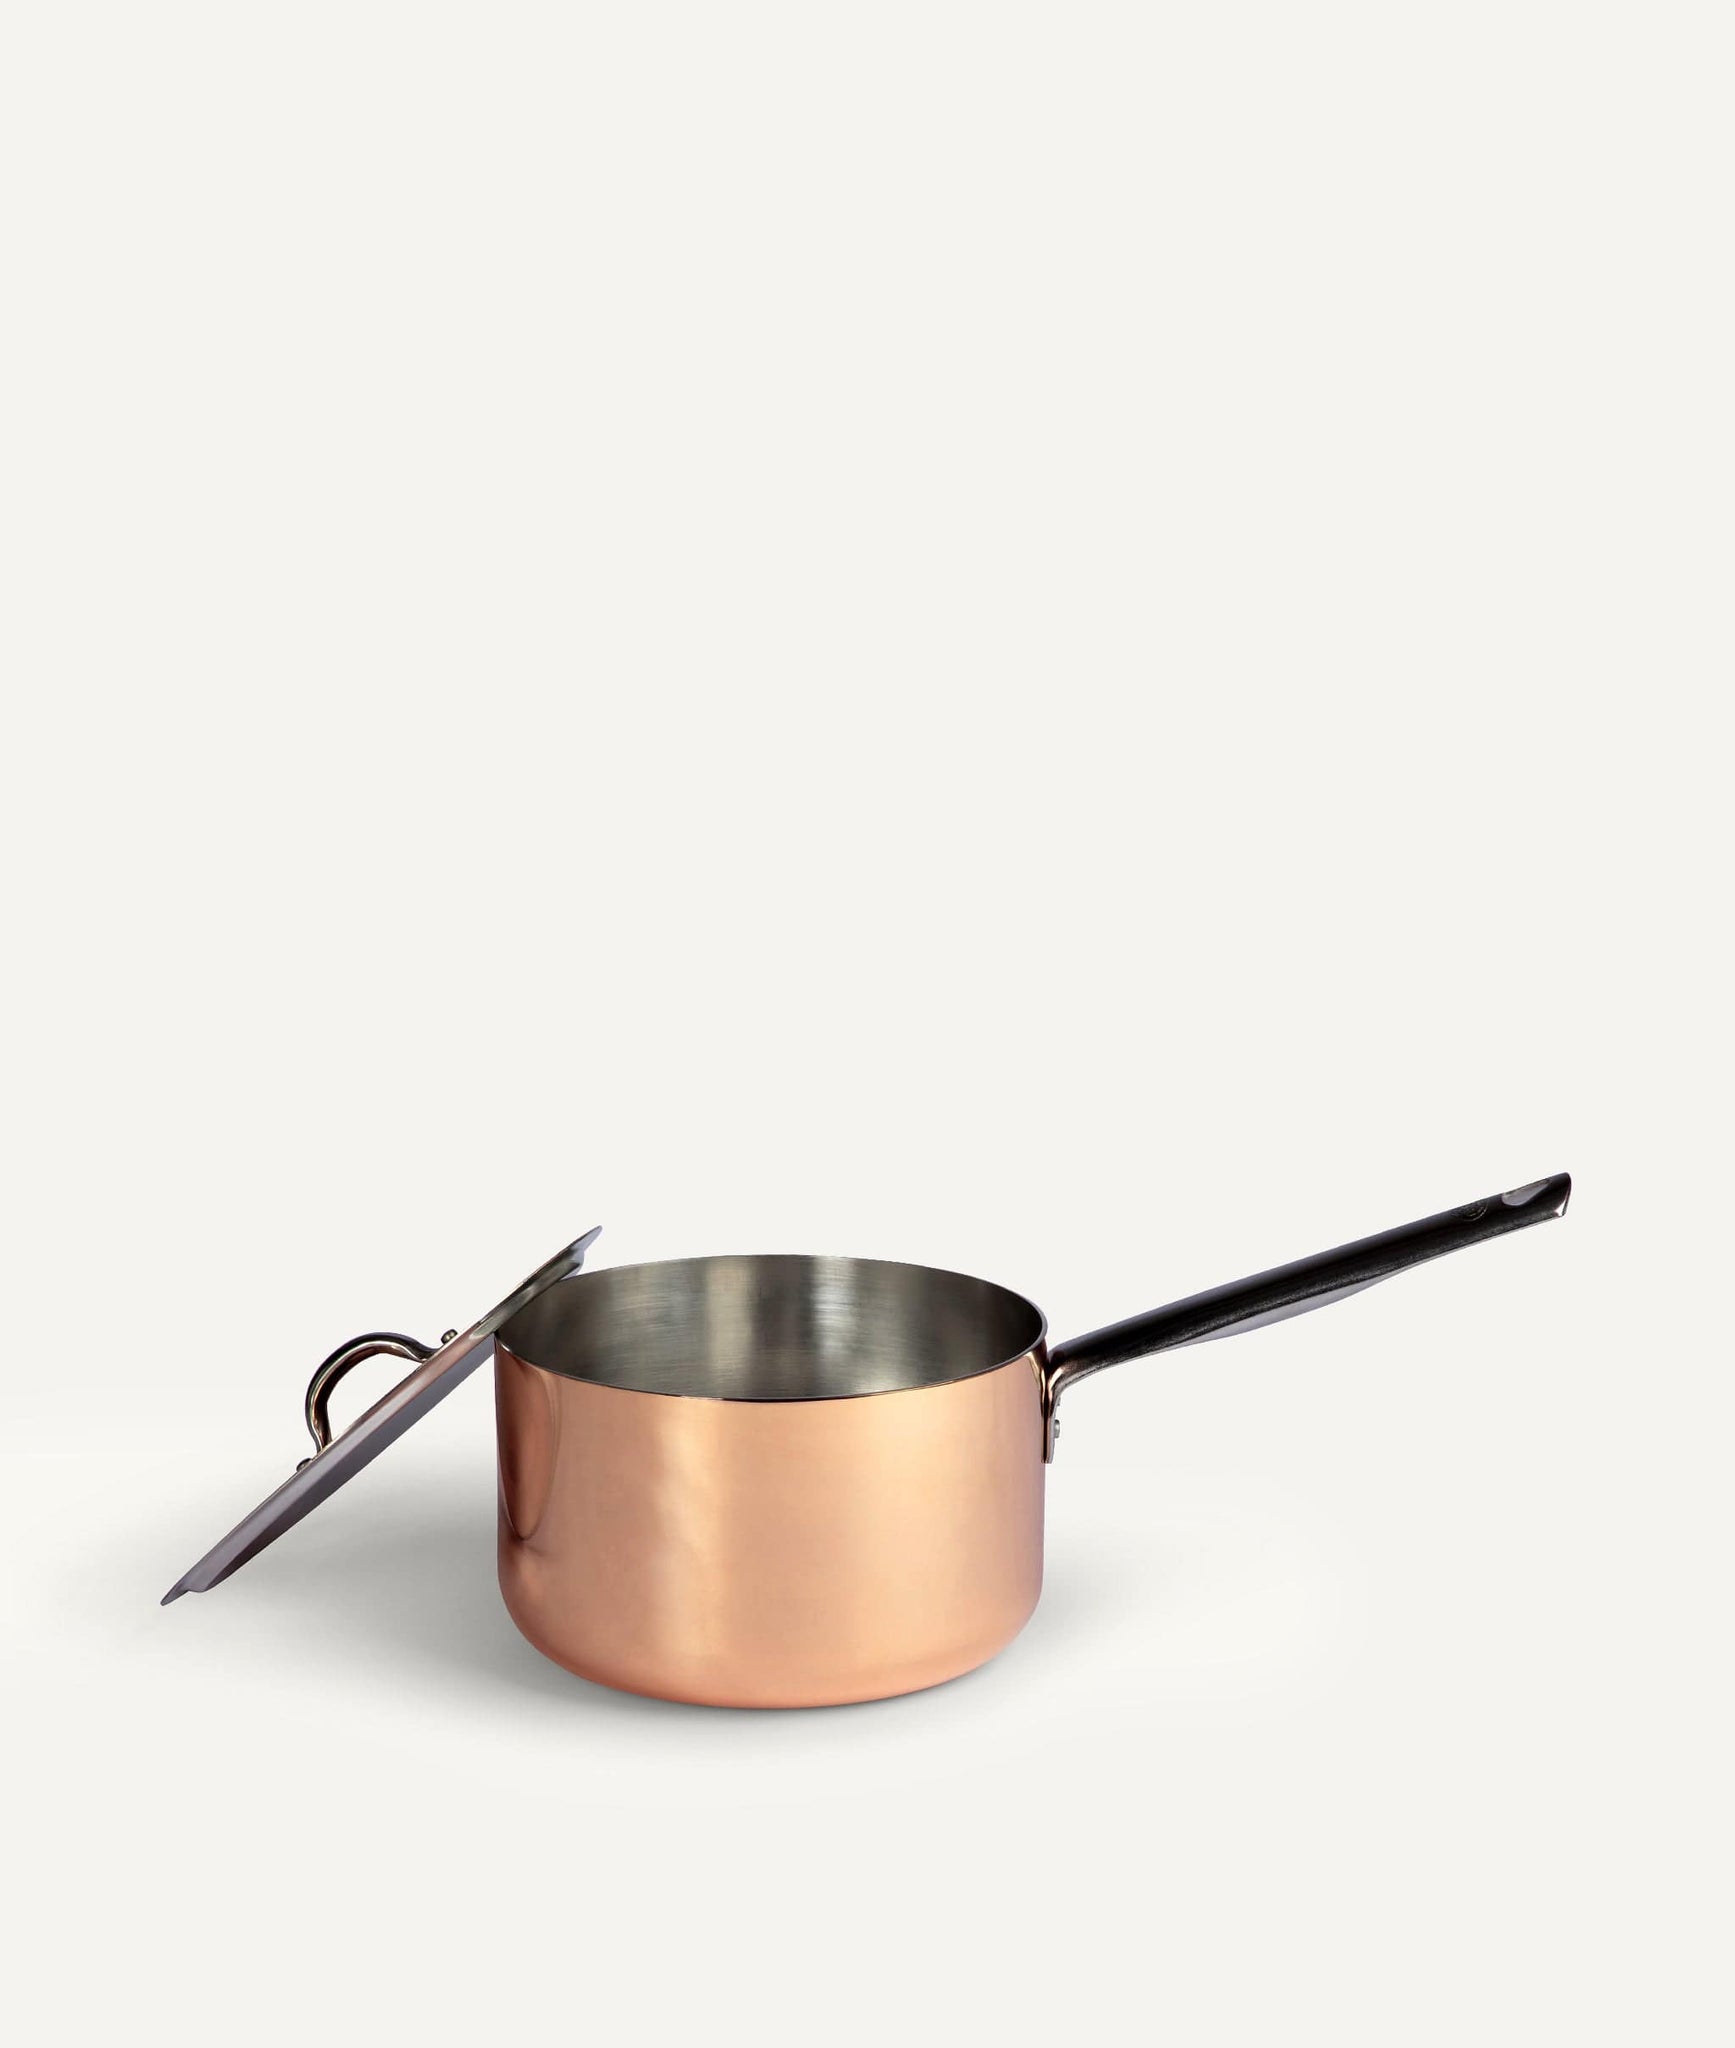 Induction one handle saucepan in Tinned Copper